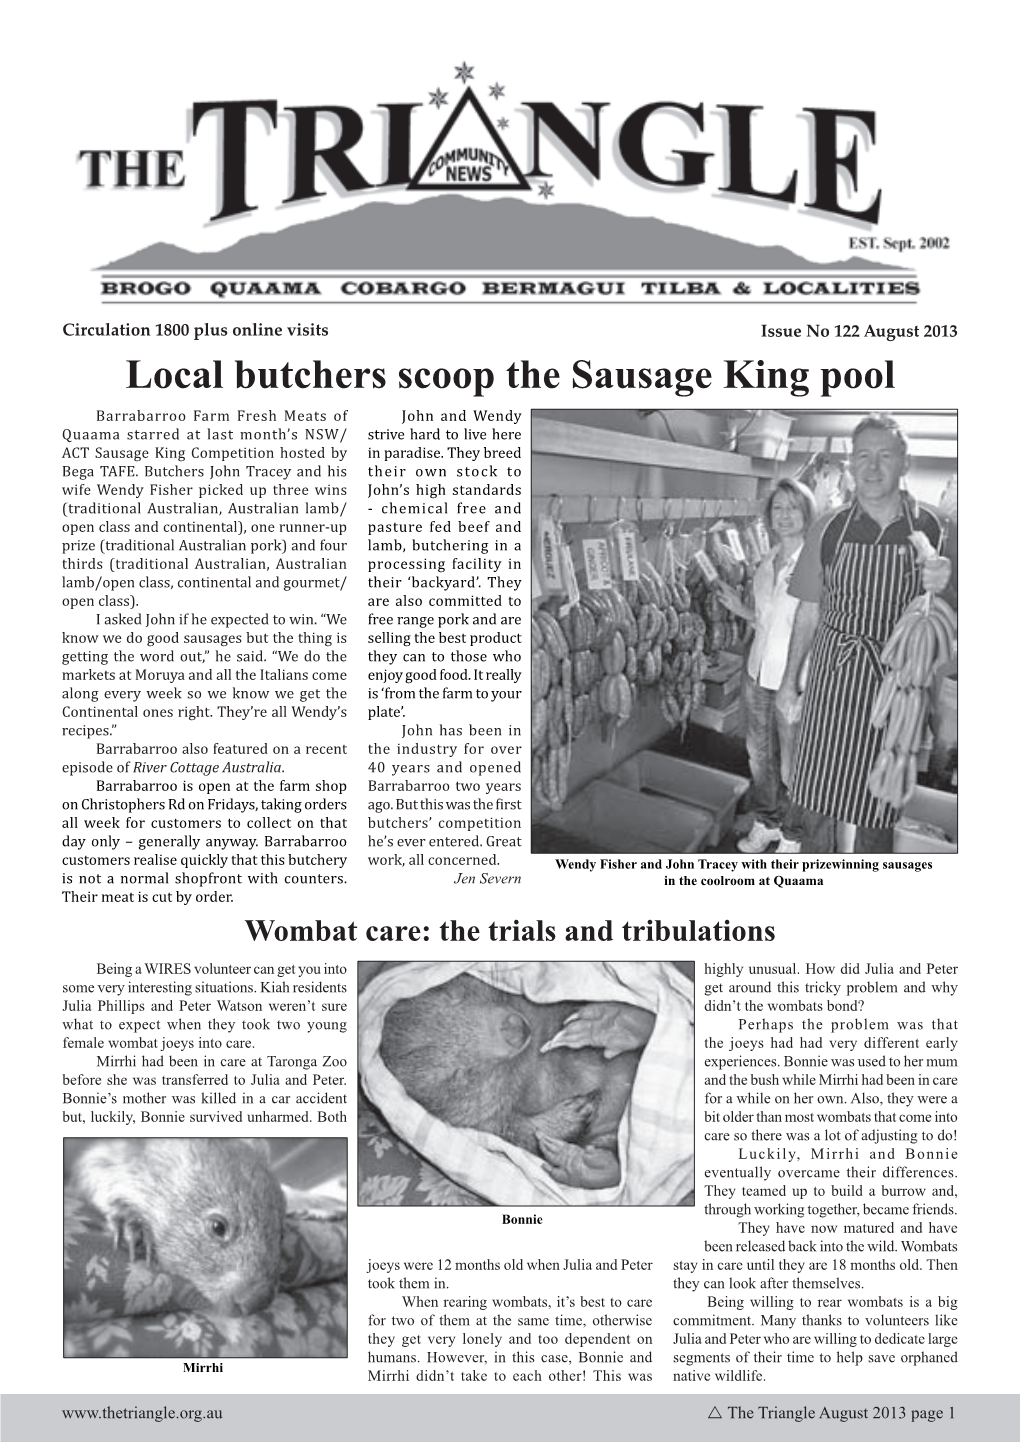 Local Butchers Scoop the Sausage King Pool